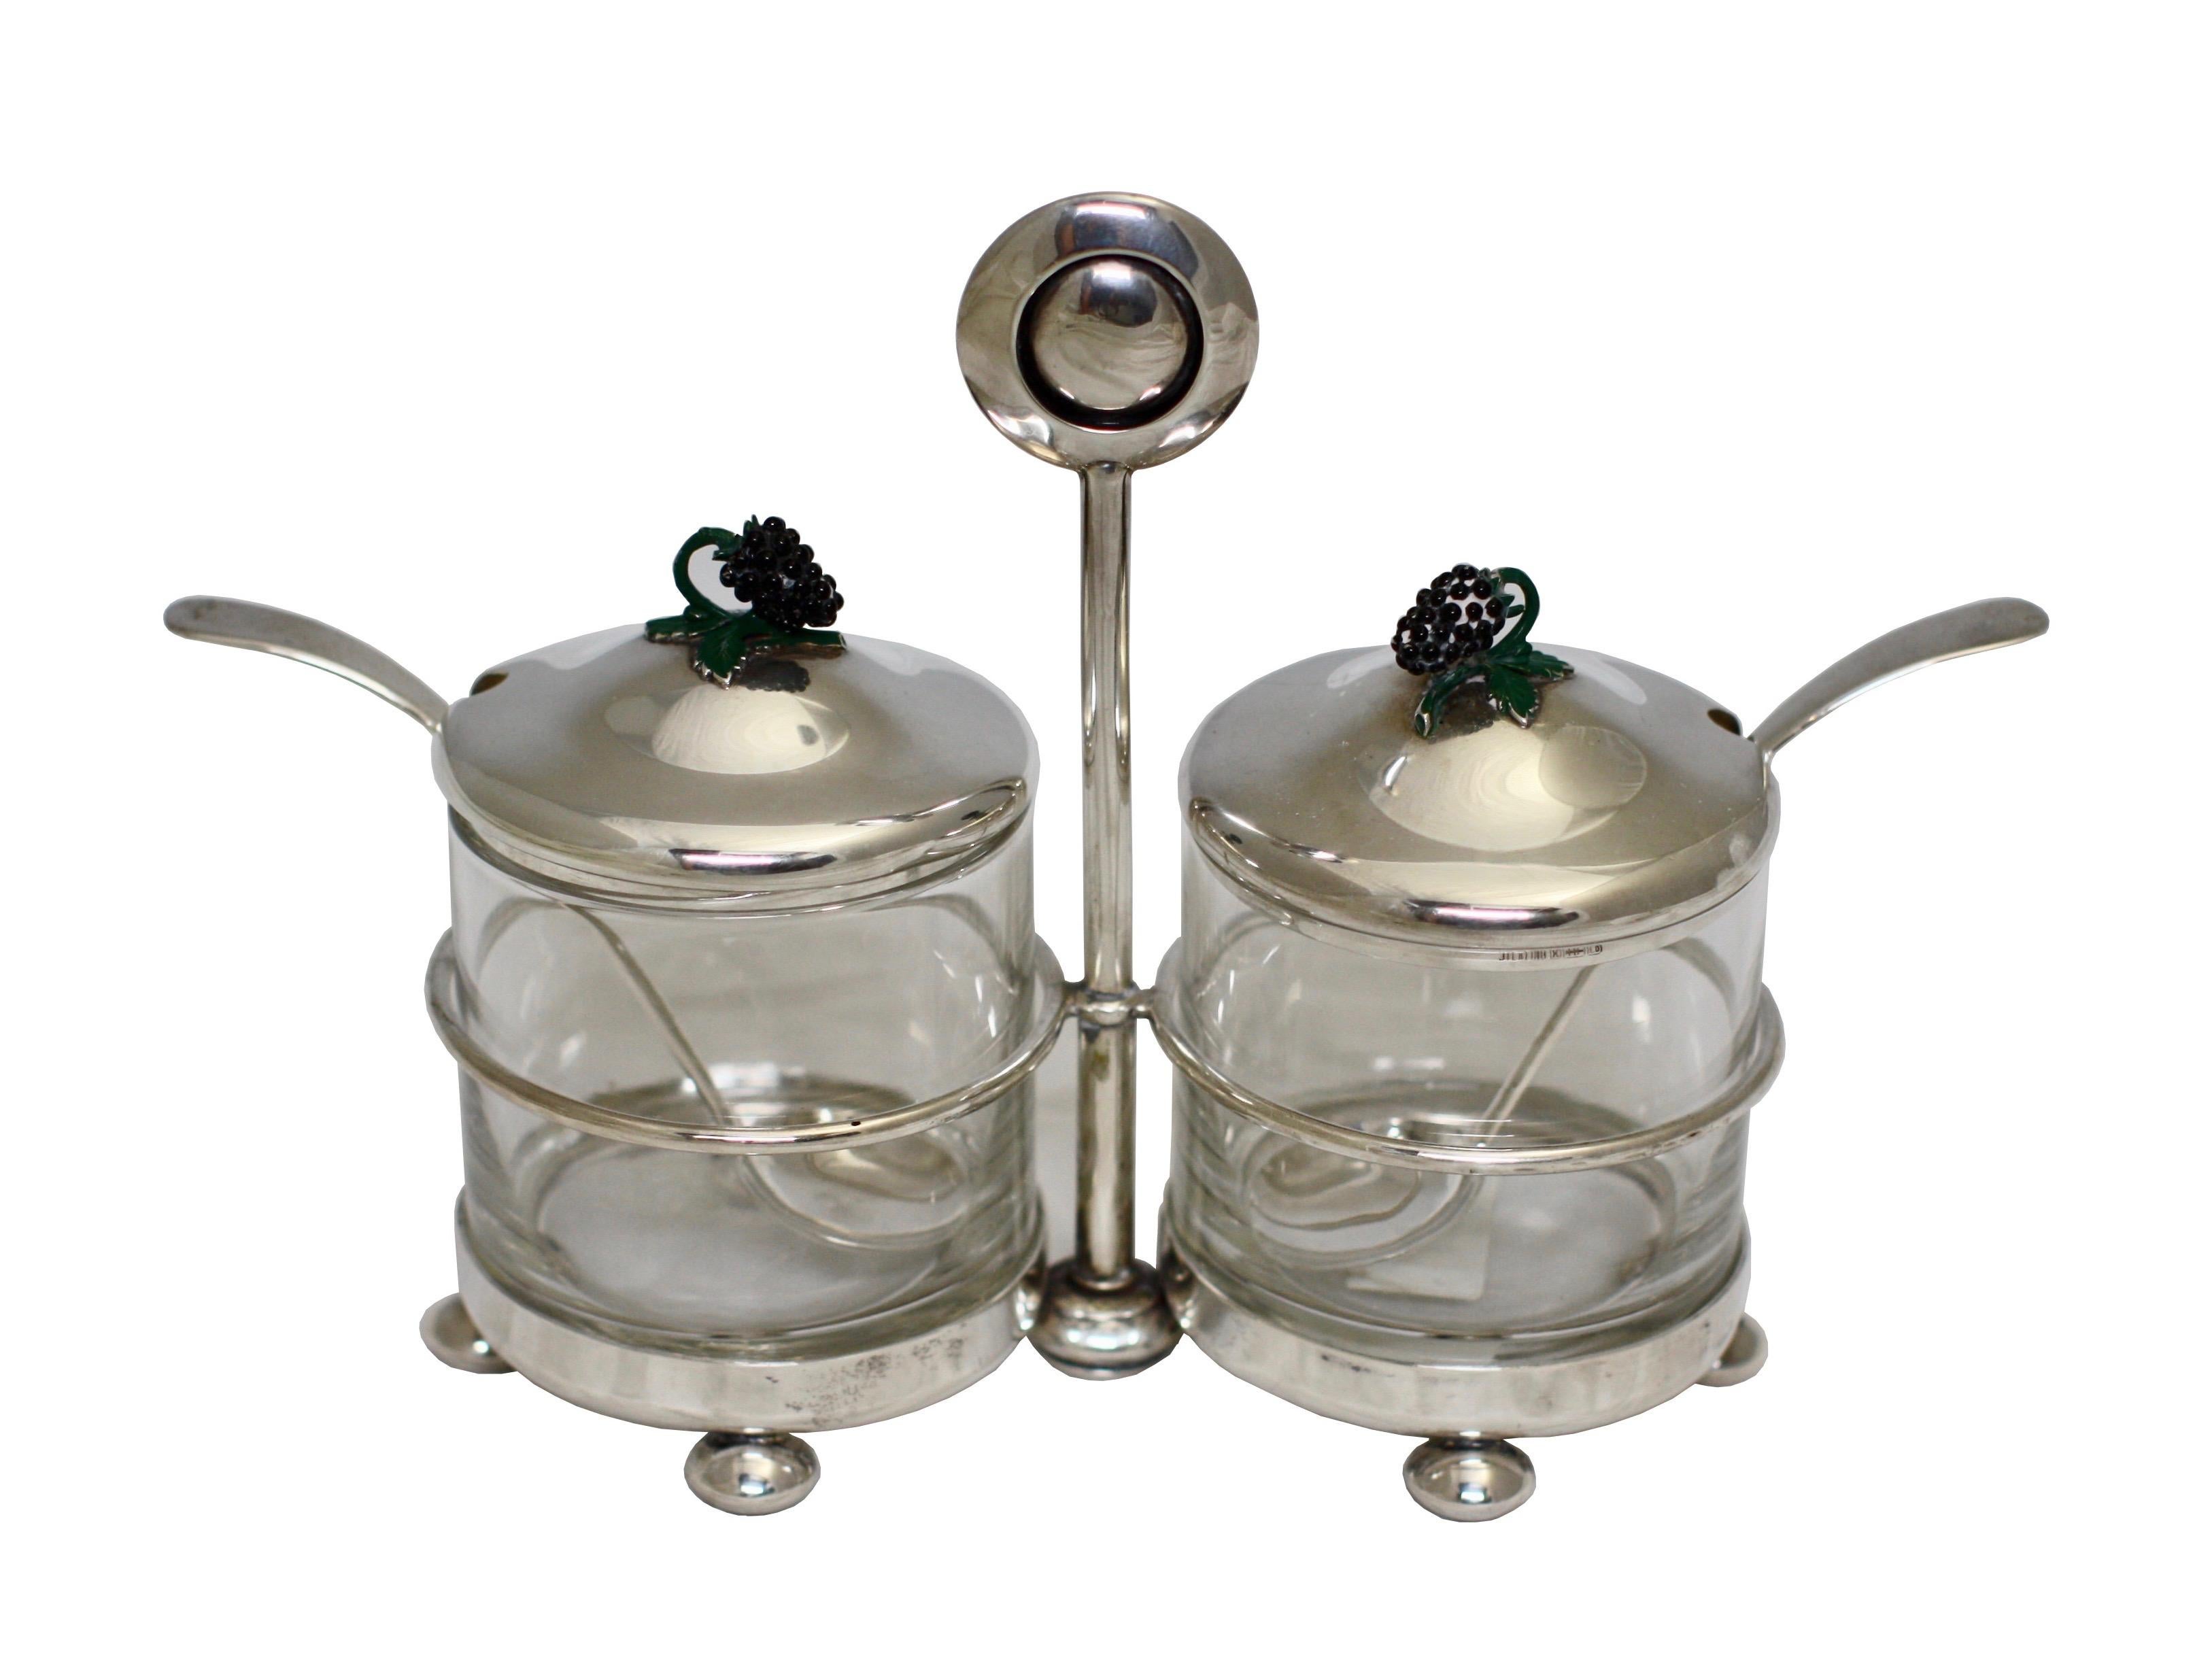 Midcentury sterling silver & enamel cruet set
A sterling silver & enamel glass-mounted cruet set,
the circular frame on ball feet, with enameled finials on the domed covers with labels,
marked on covers & reverse of spoons with mark